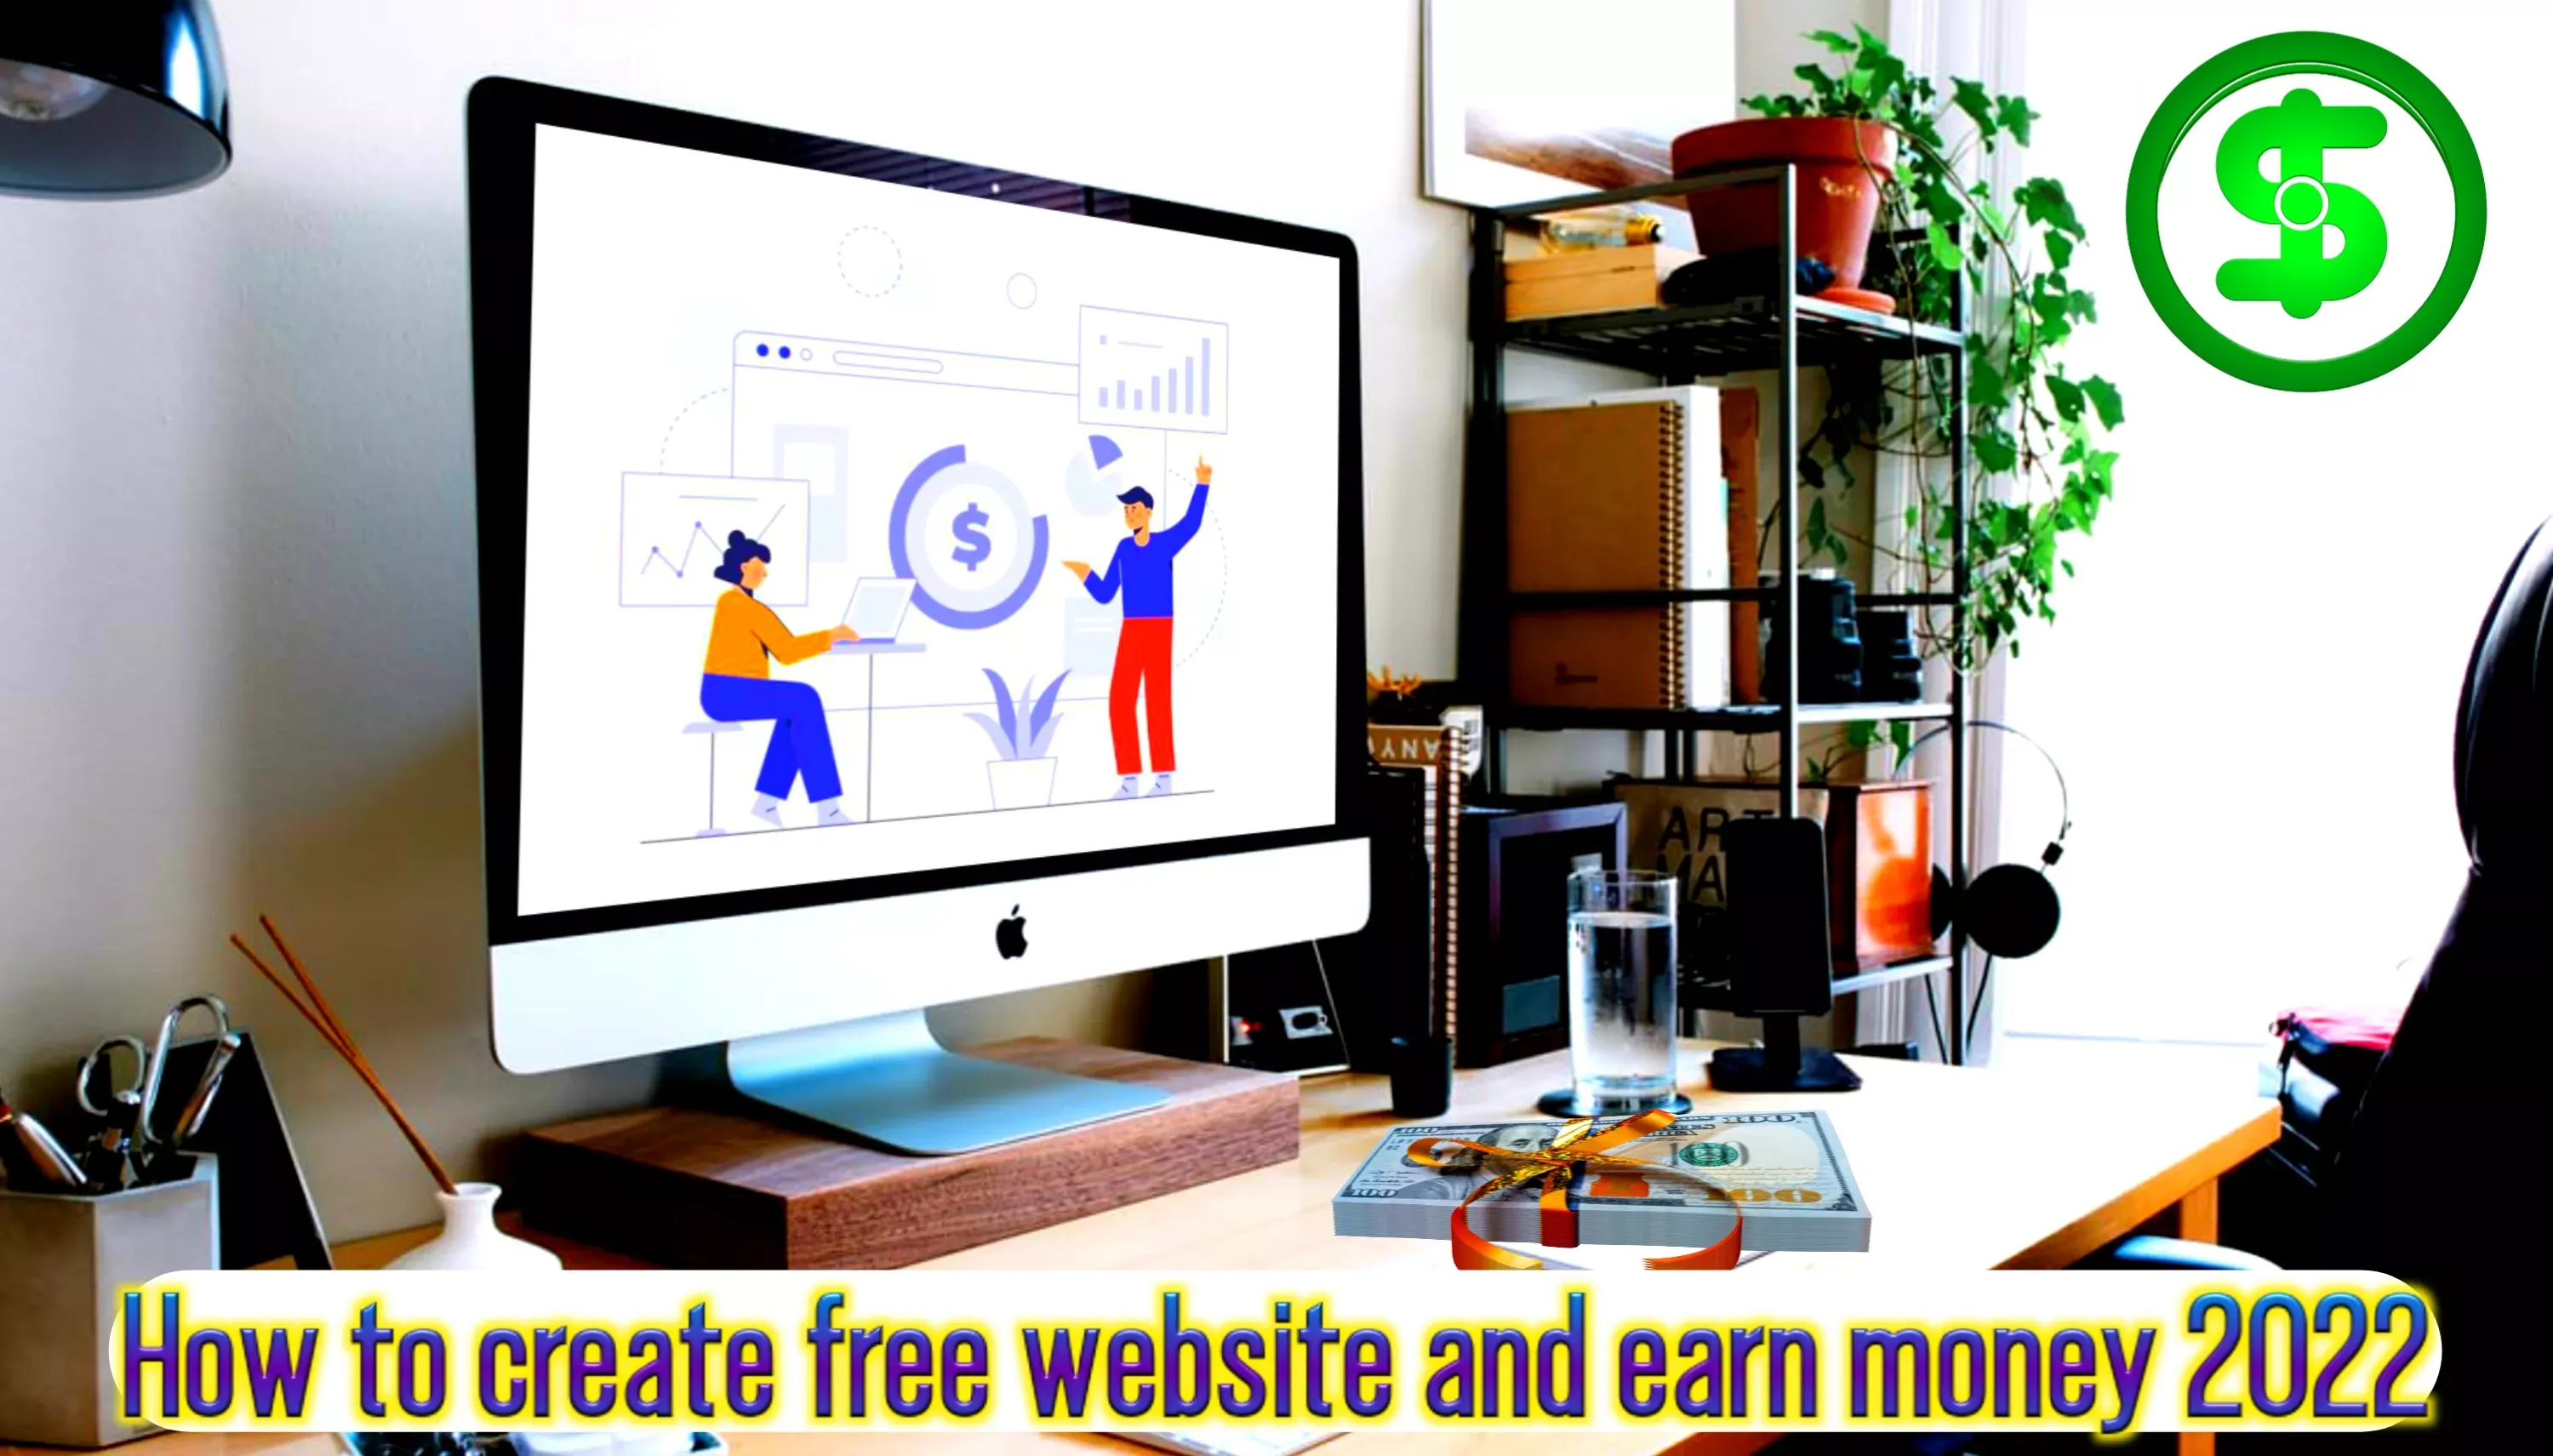 How to create free website and earn money 2022